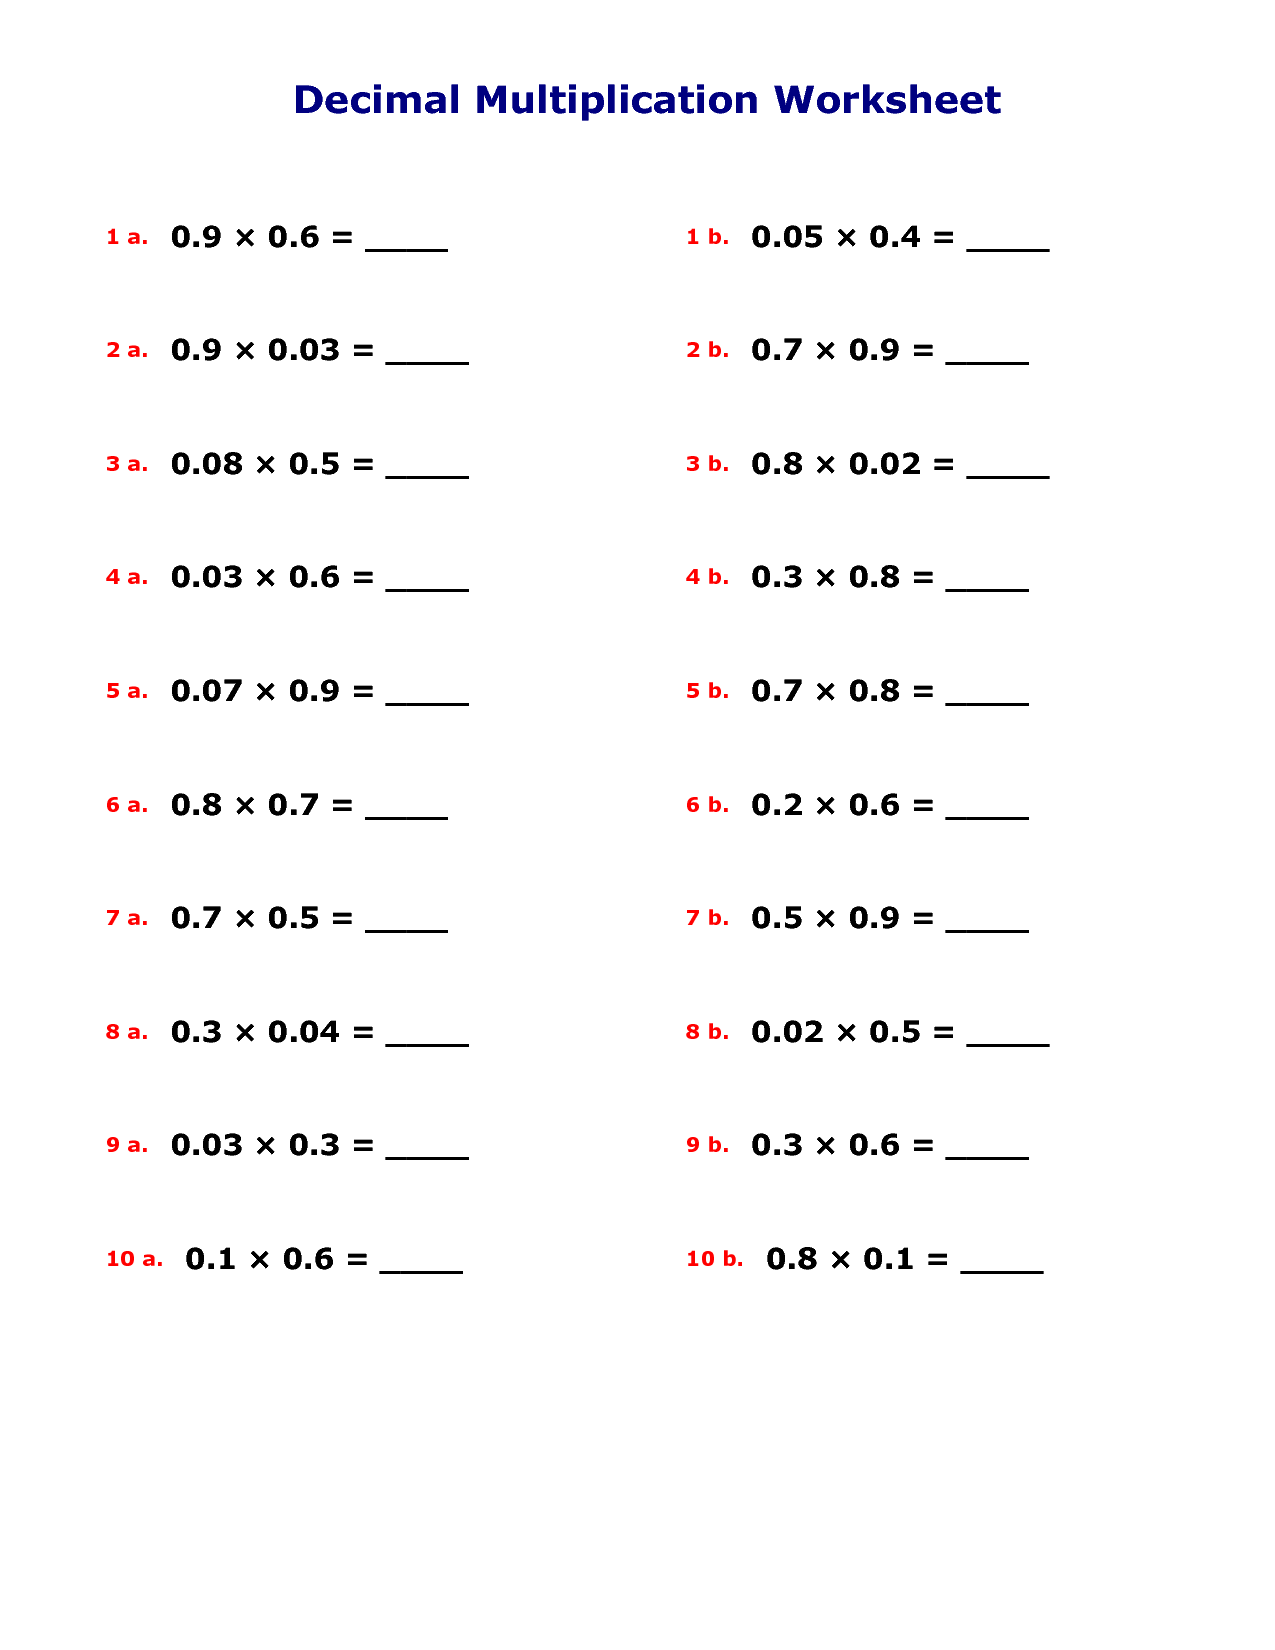 12-best-images-of-decimal-division-and-multiplication-worksheet-multiplication-with-decimals